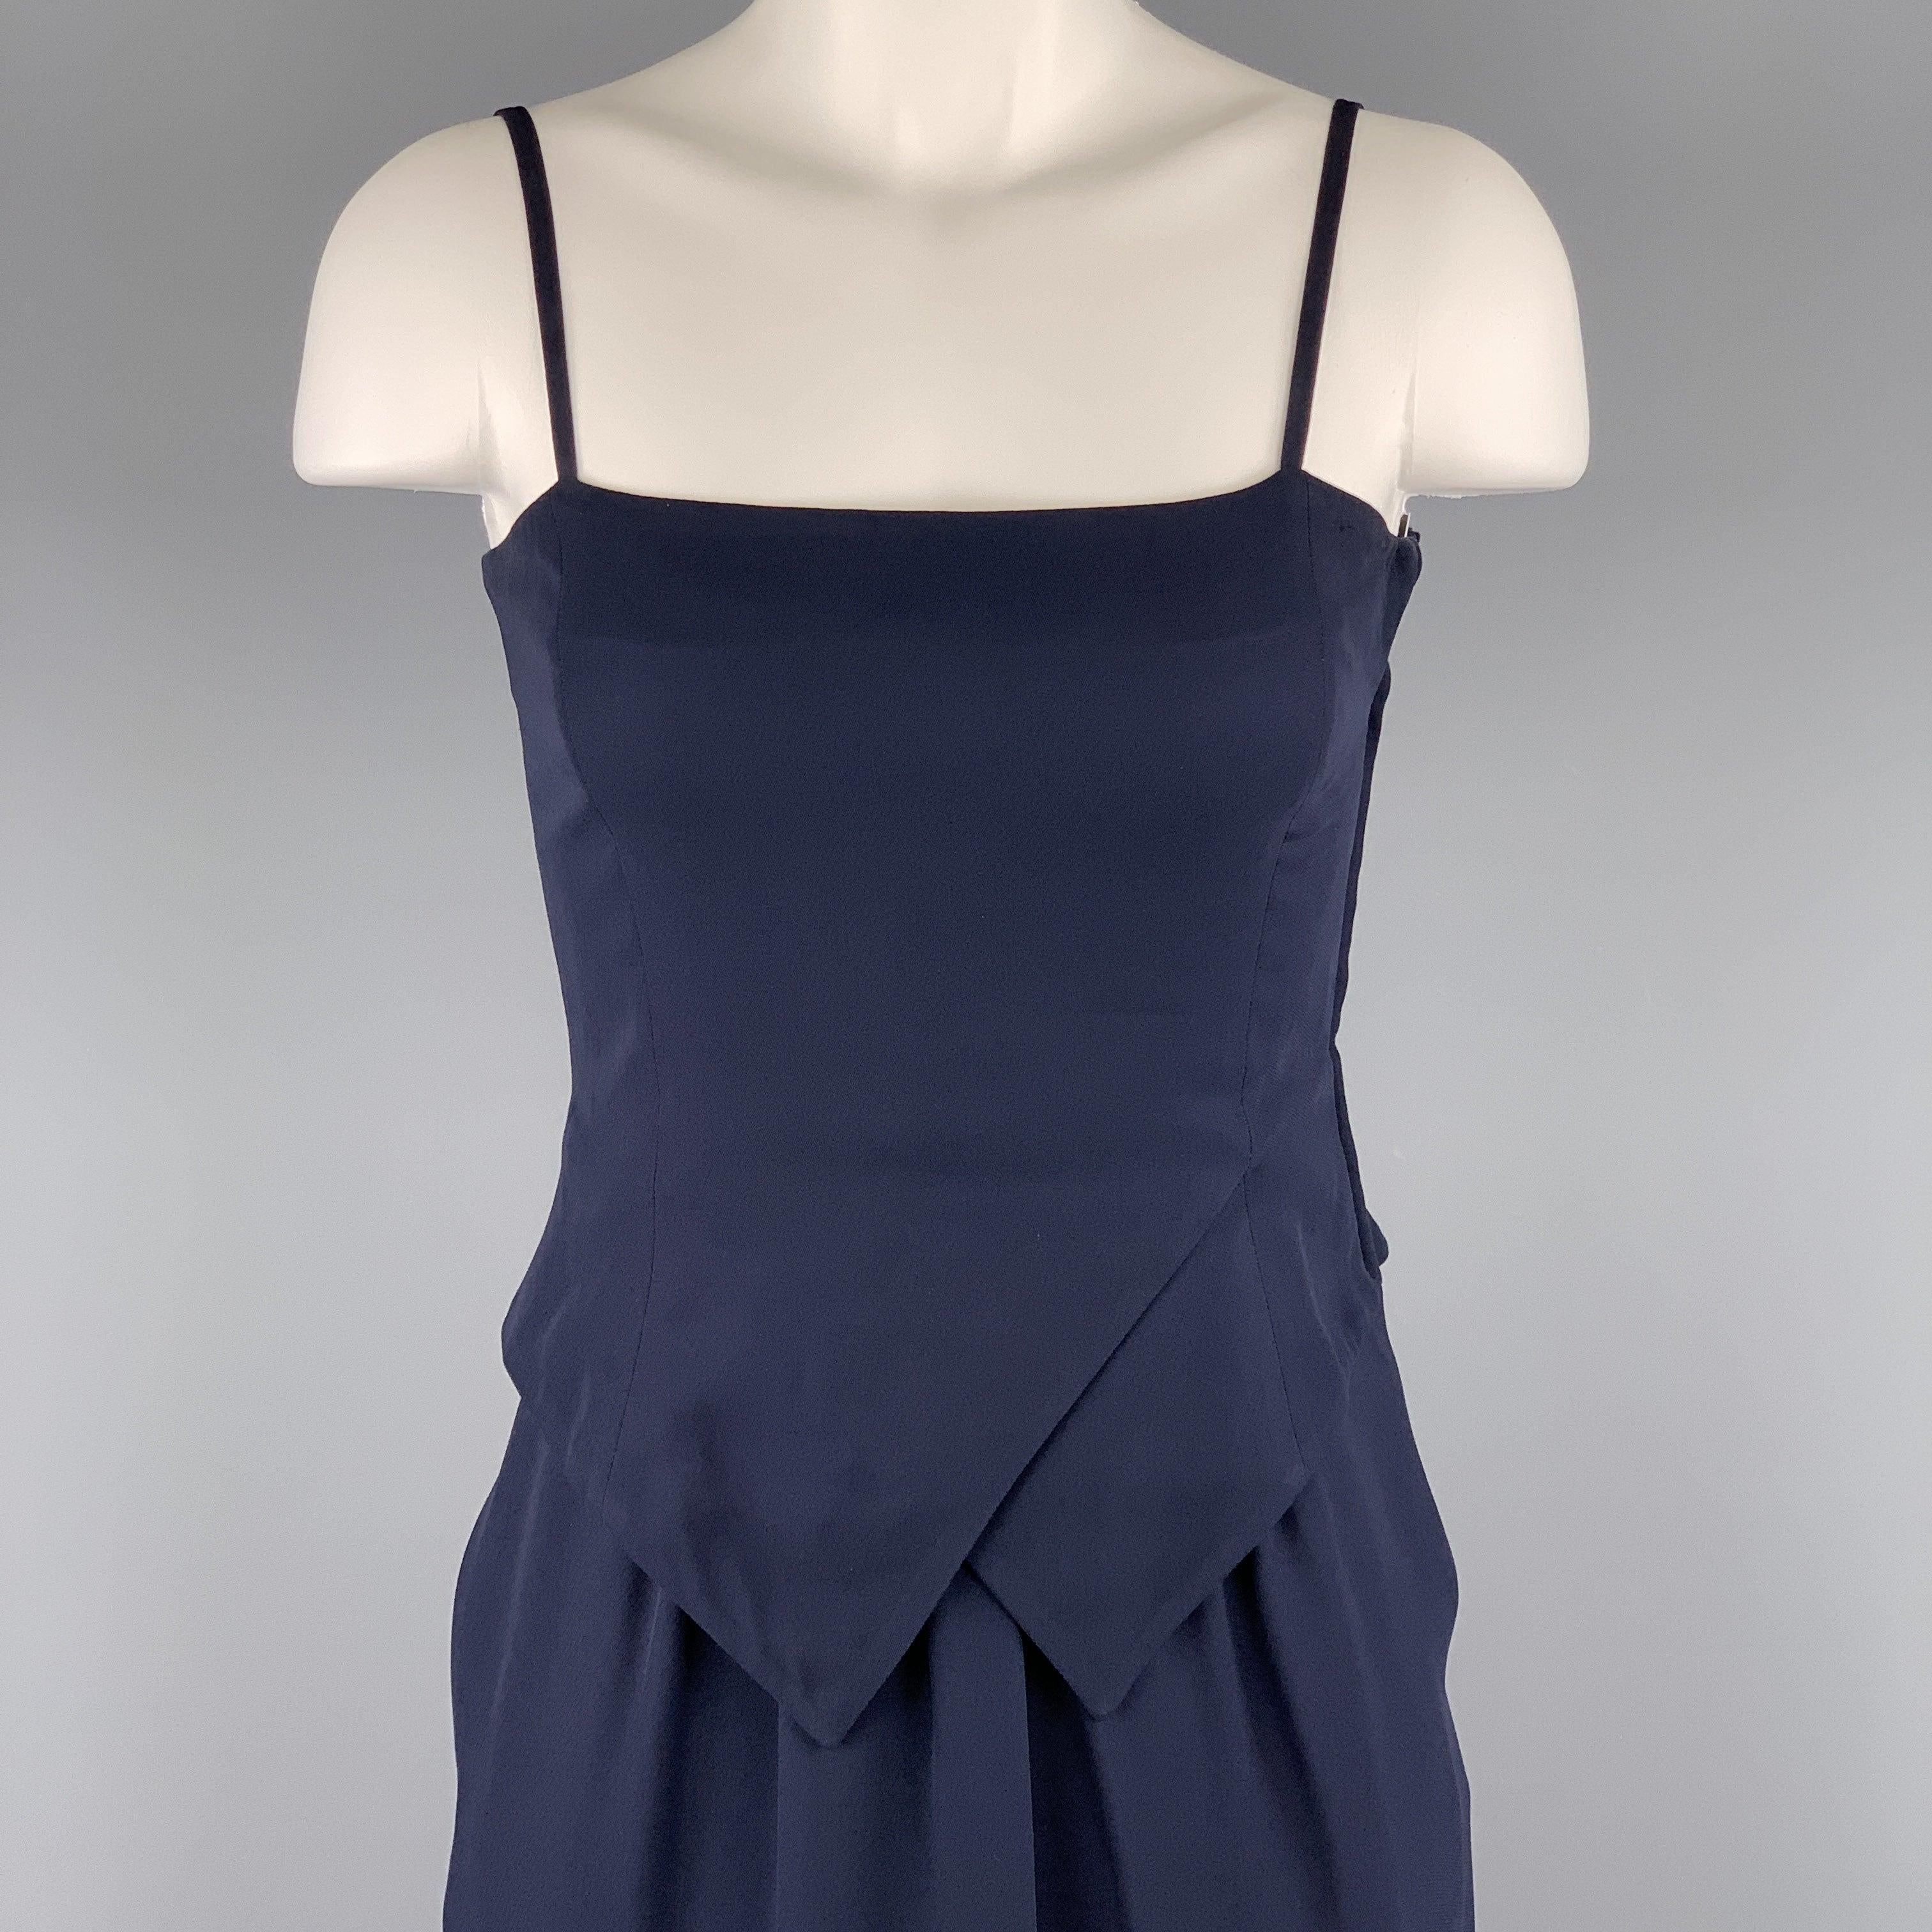 Vintage GIORGIO ARMANI cocktail dress comes in navy blue viscose with a spaghetti strap bustier bodice top, wrap point detailed waistline overlay, and pleated skirt. Made in Italy.Excellent
Pre-Owned Condition. 

Marked:   38/4 

Measurements: 
 